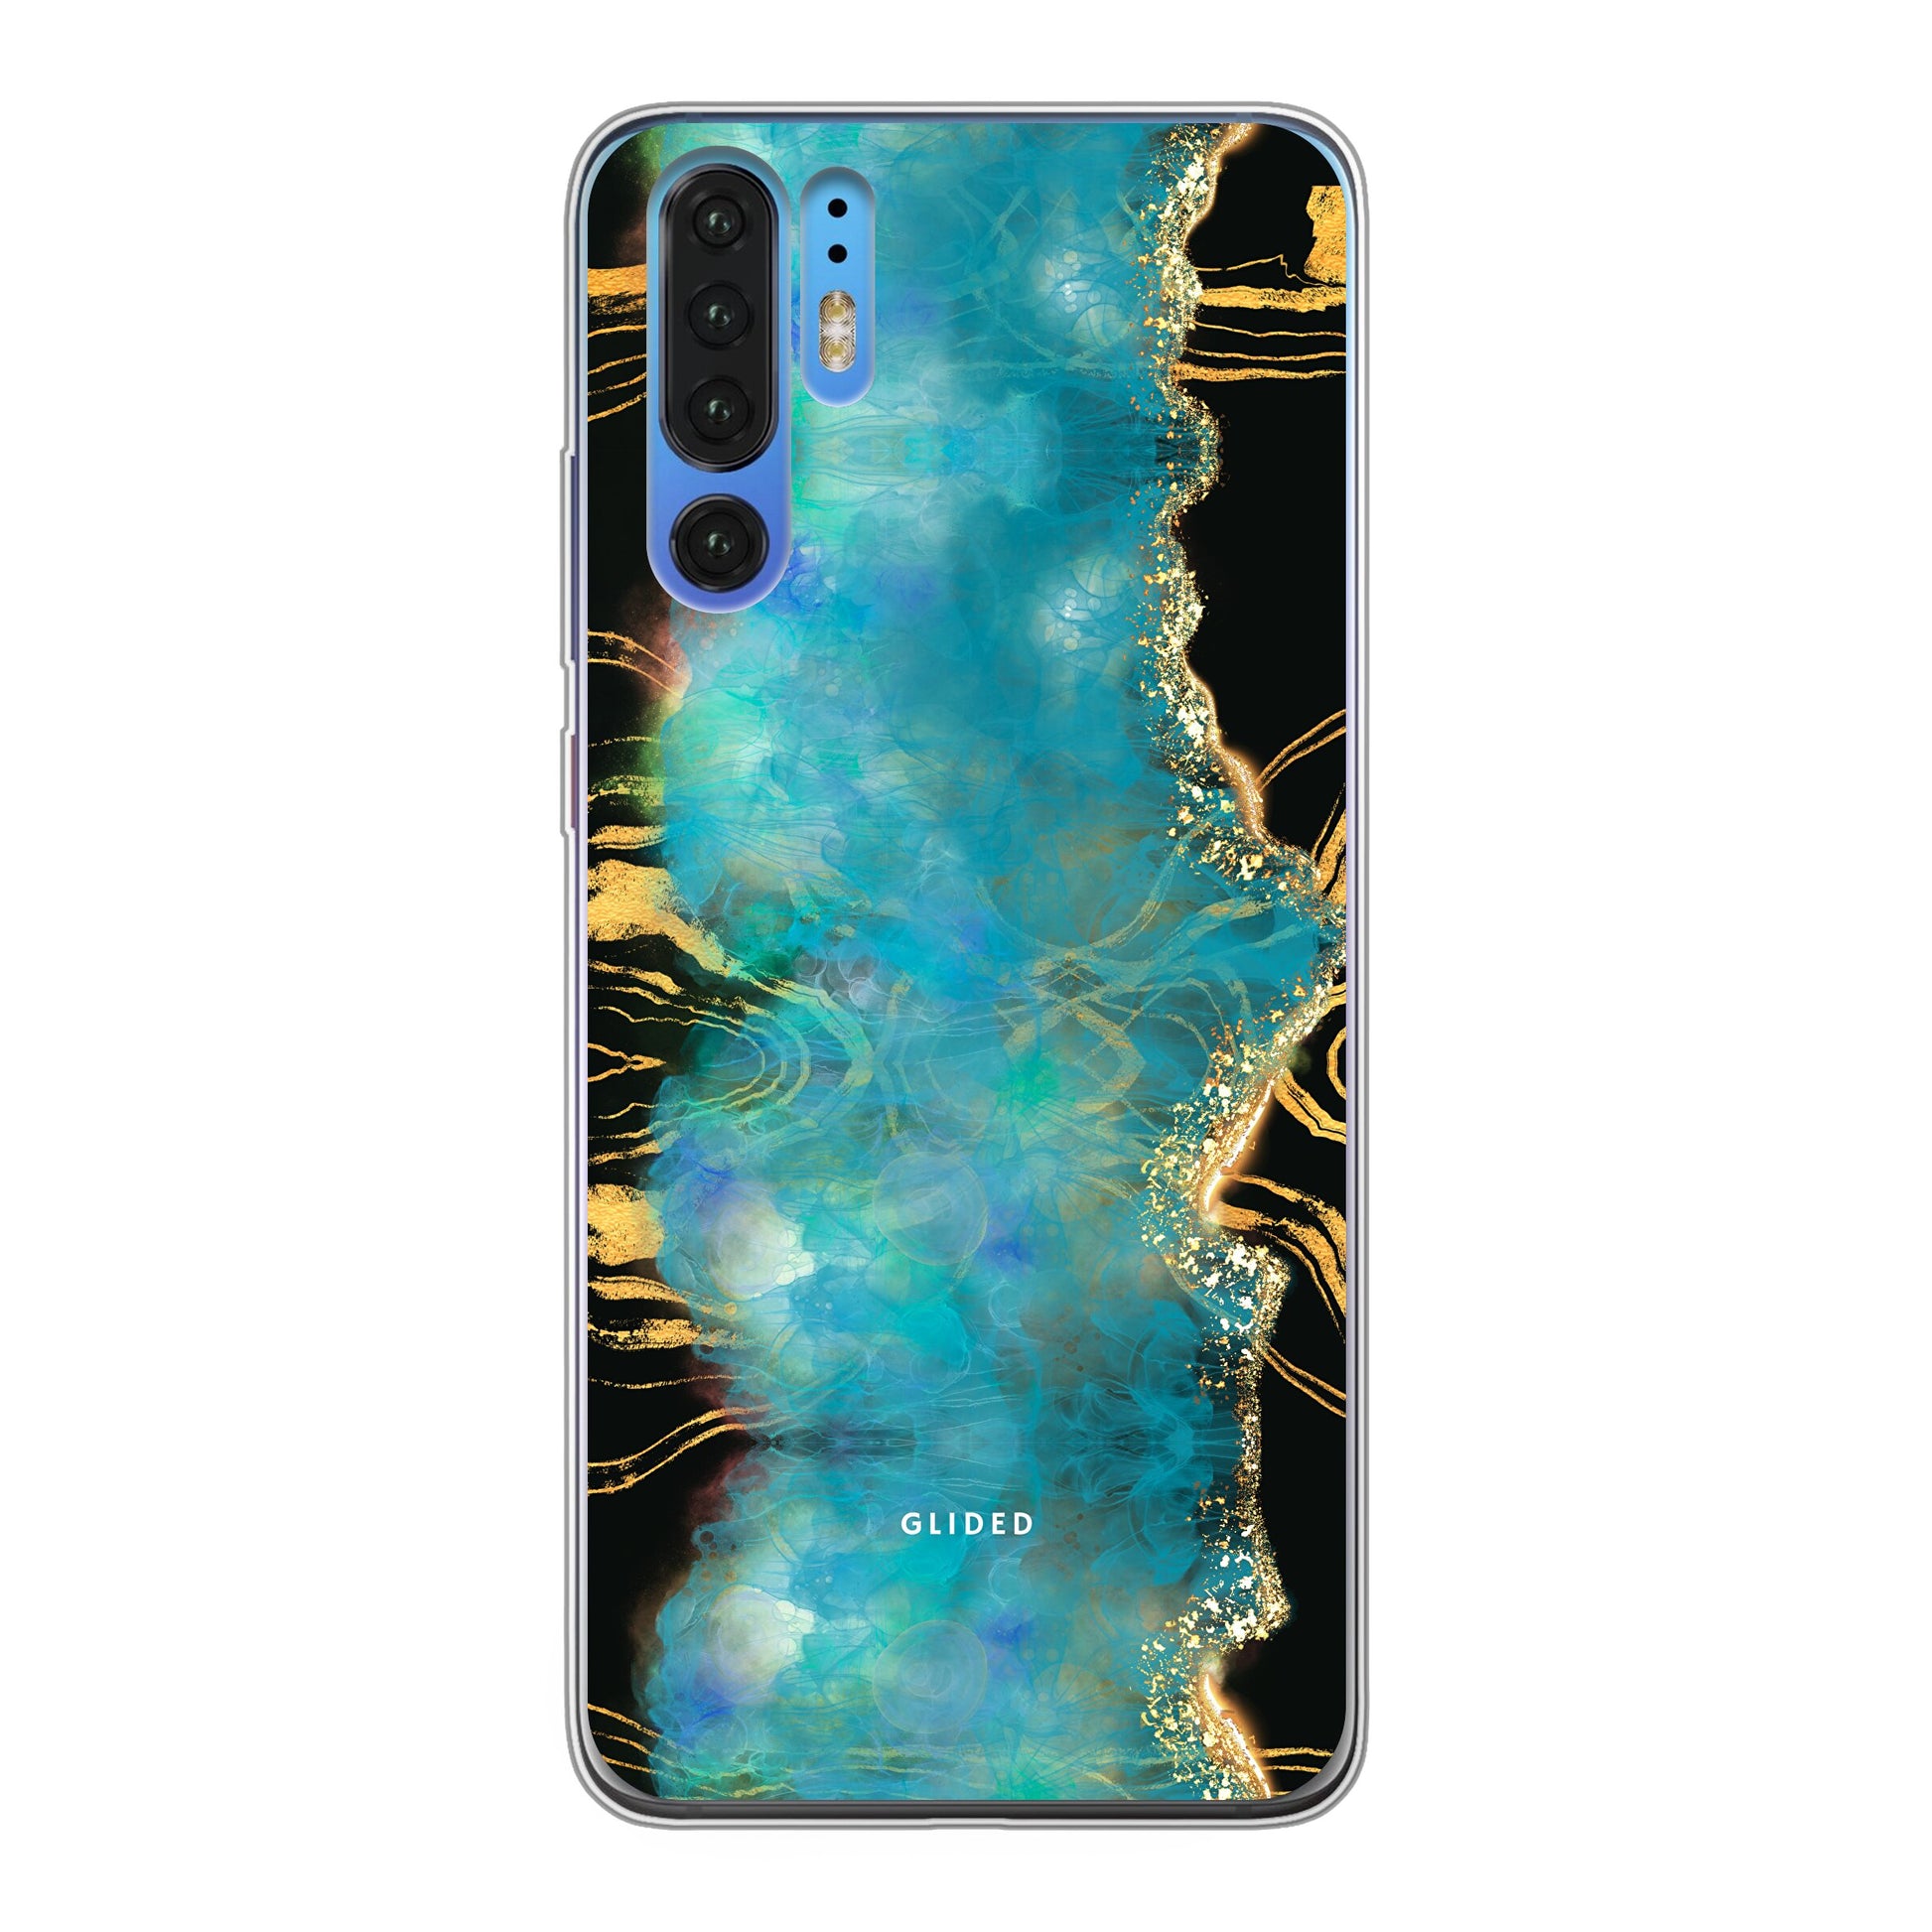 Waterly - Huawei P30 Pro Handyhülle Soft case